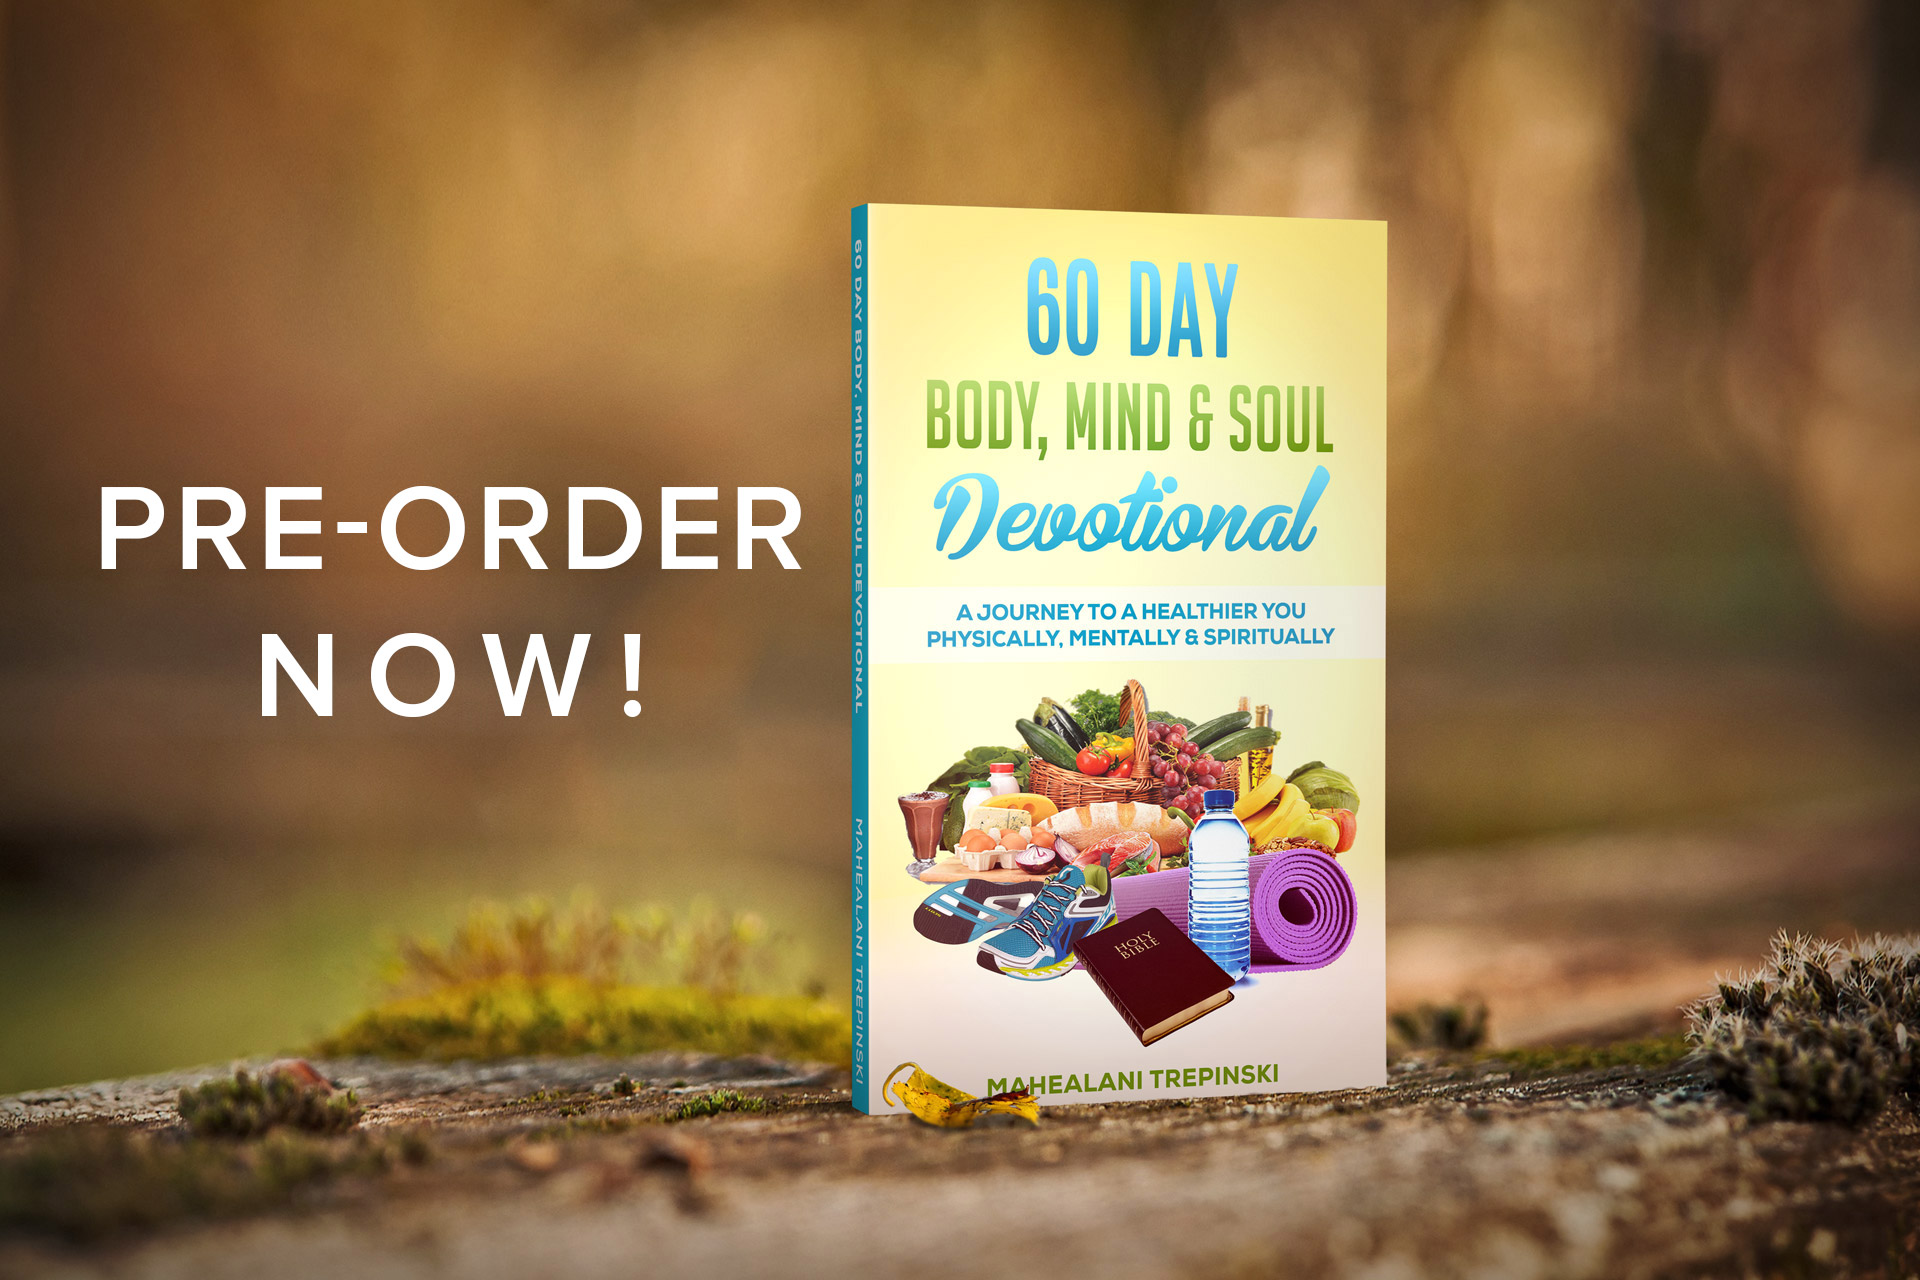 60-day-body-mind-soul-devotional-book-healing-masters